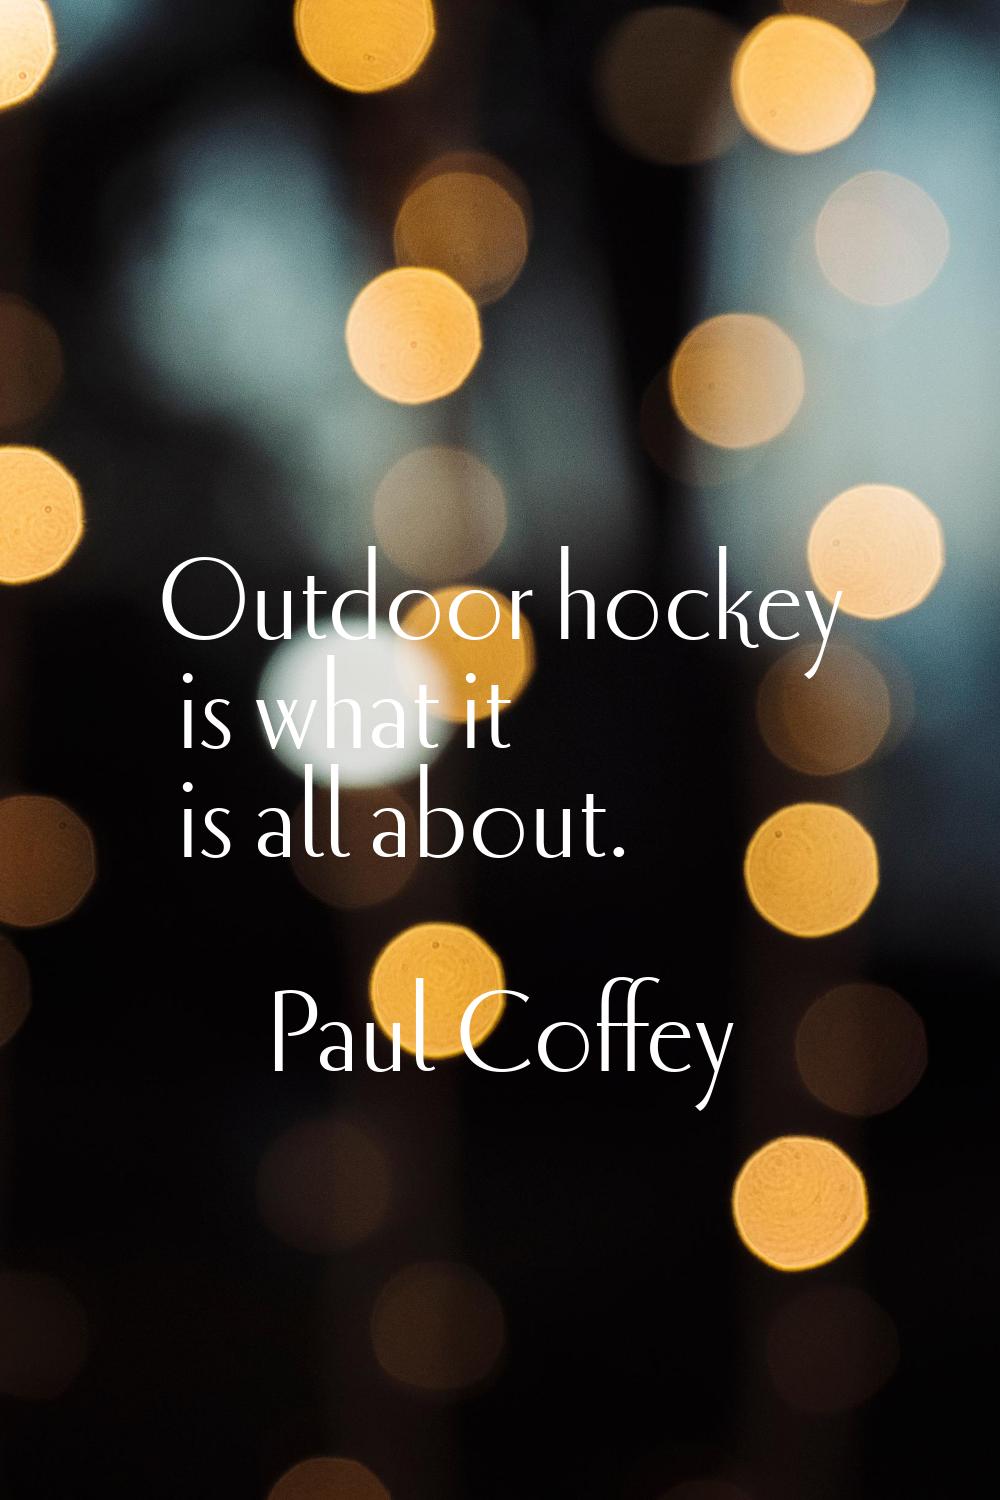 Outdoor hockey is what it is all about.